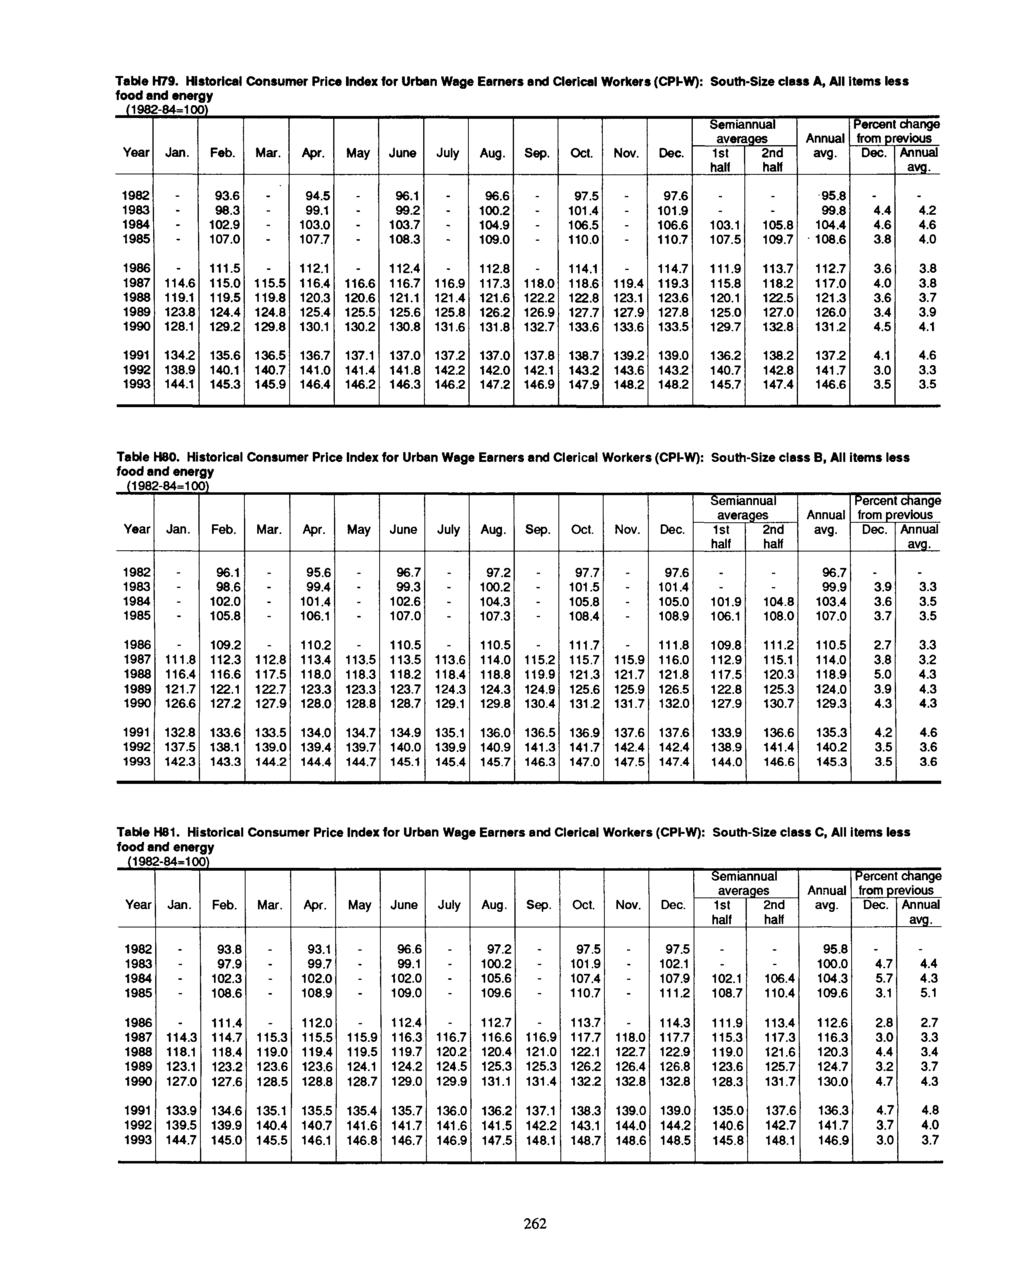 Table H79. Historical Consumer Price for Urban Wage Earners and Clerical Workers (CPI-W): South-Size class A, All items less food and energy (1982-84=100) Year Feb. Mar. Apr. May June July Aug. Sep.